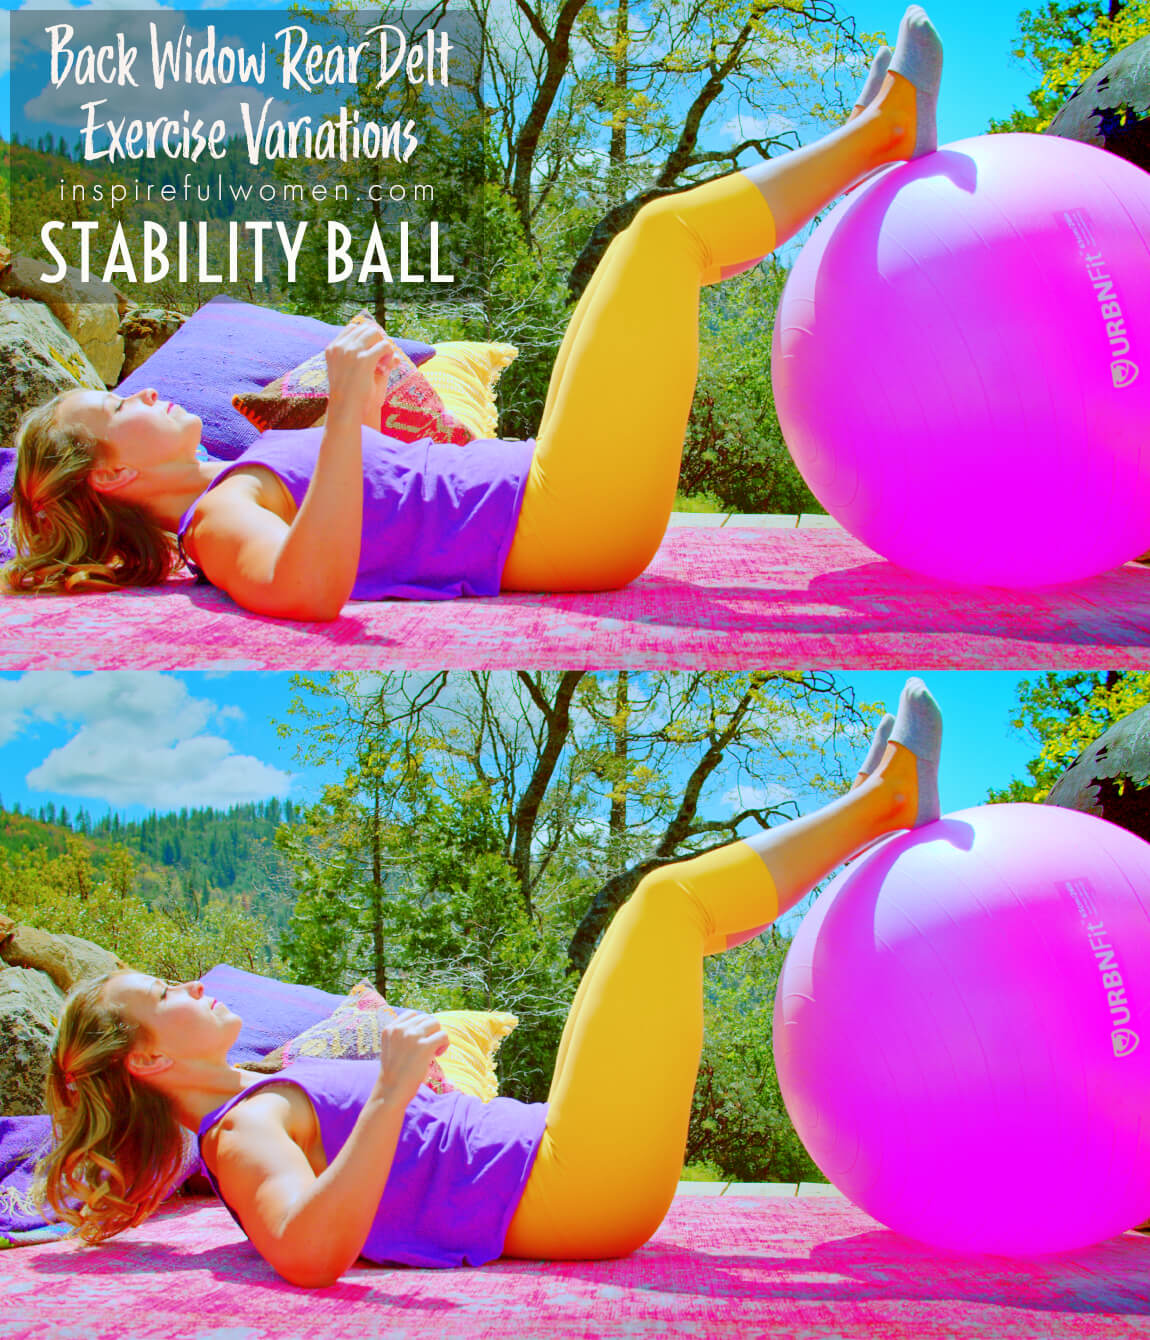 stability-ball-back-widow-rear-delt-exercise-variation